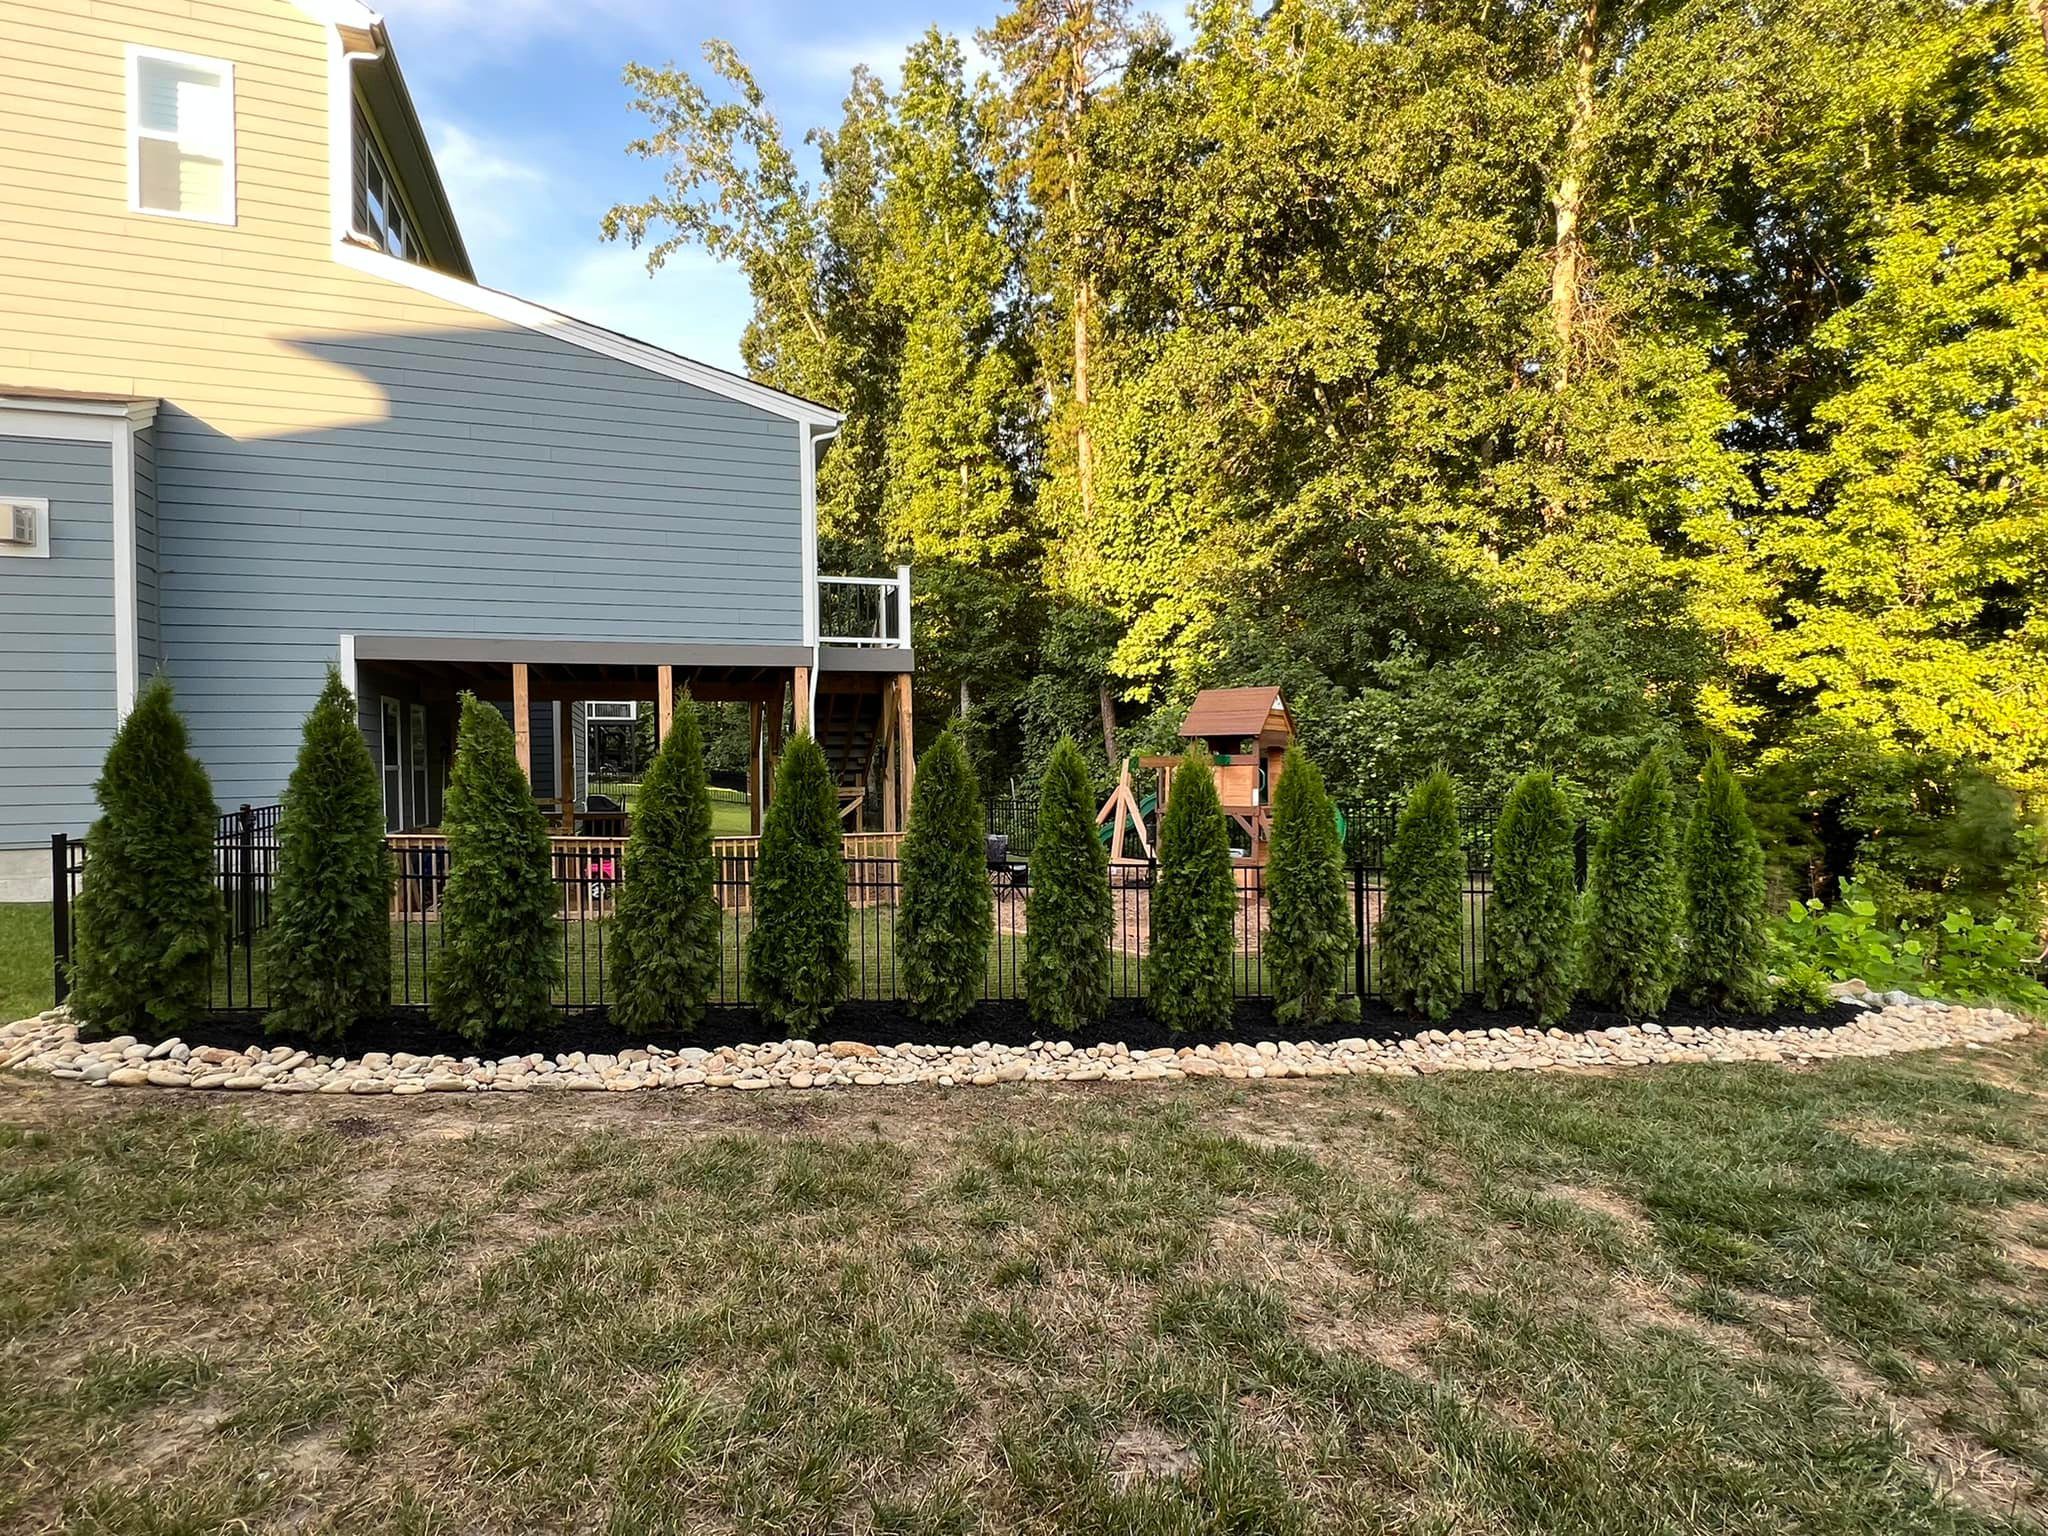 Emerald Green Arborvitae Trees 🌲 🌲 🌲 – Outdoor Living Tip of the Day